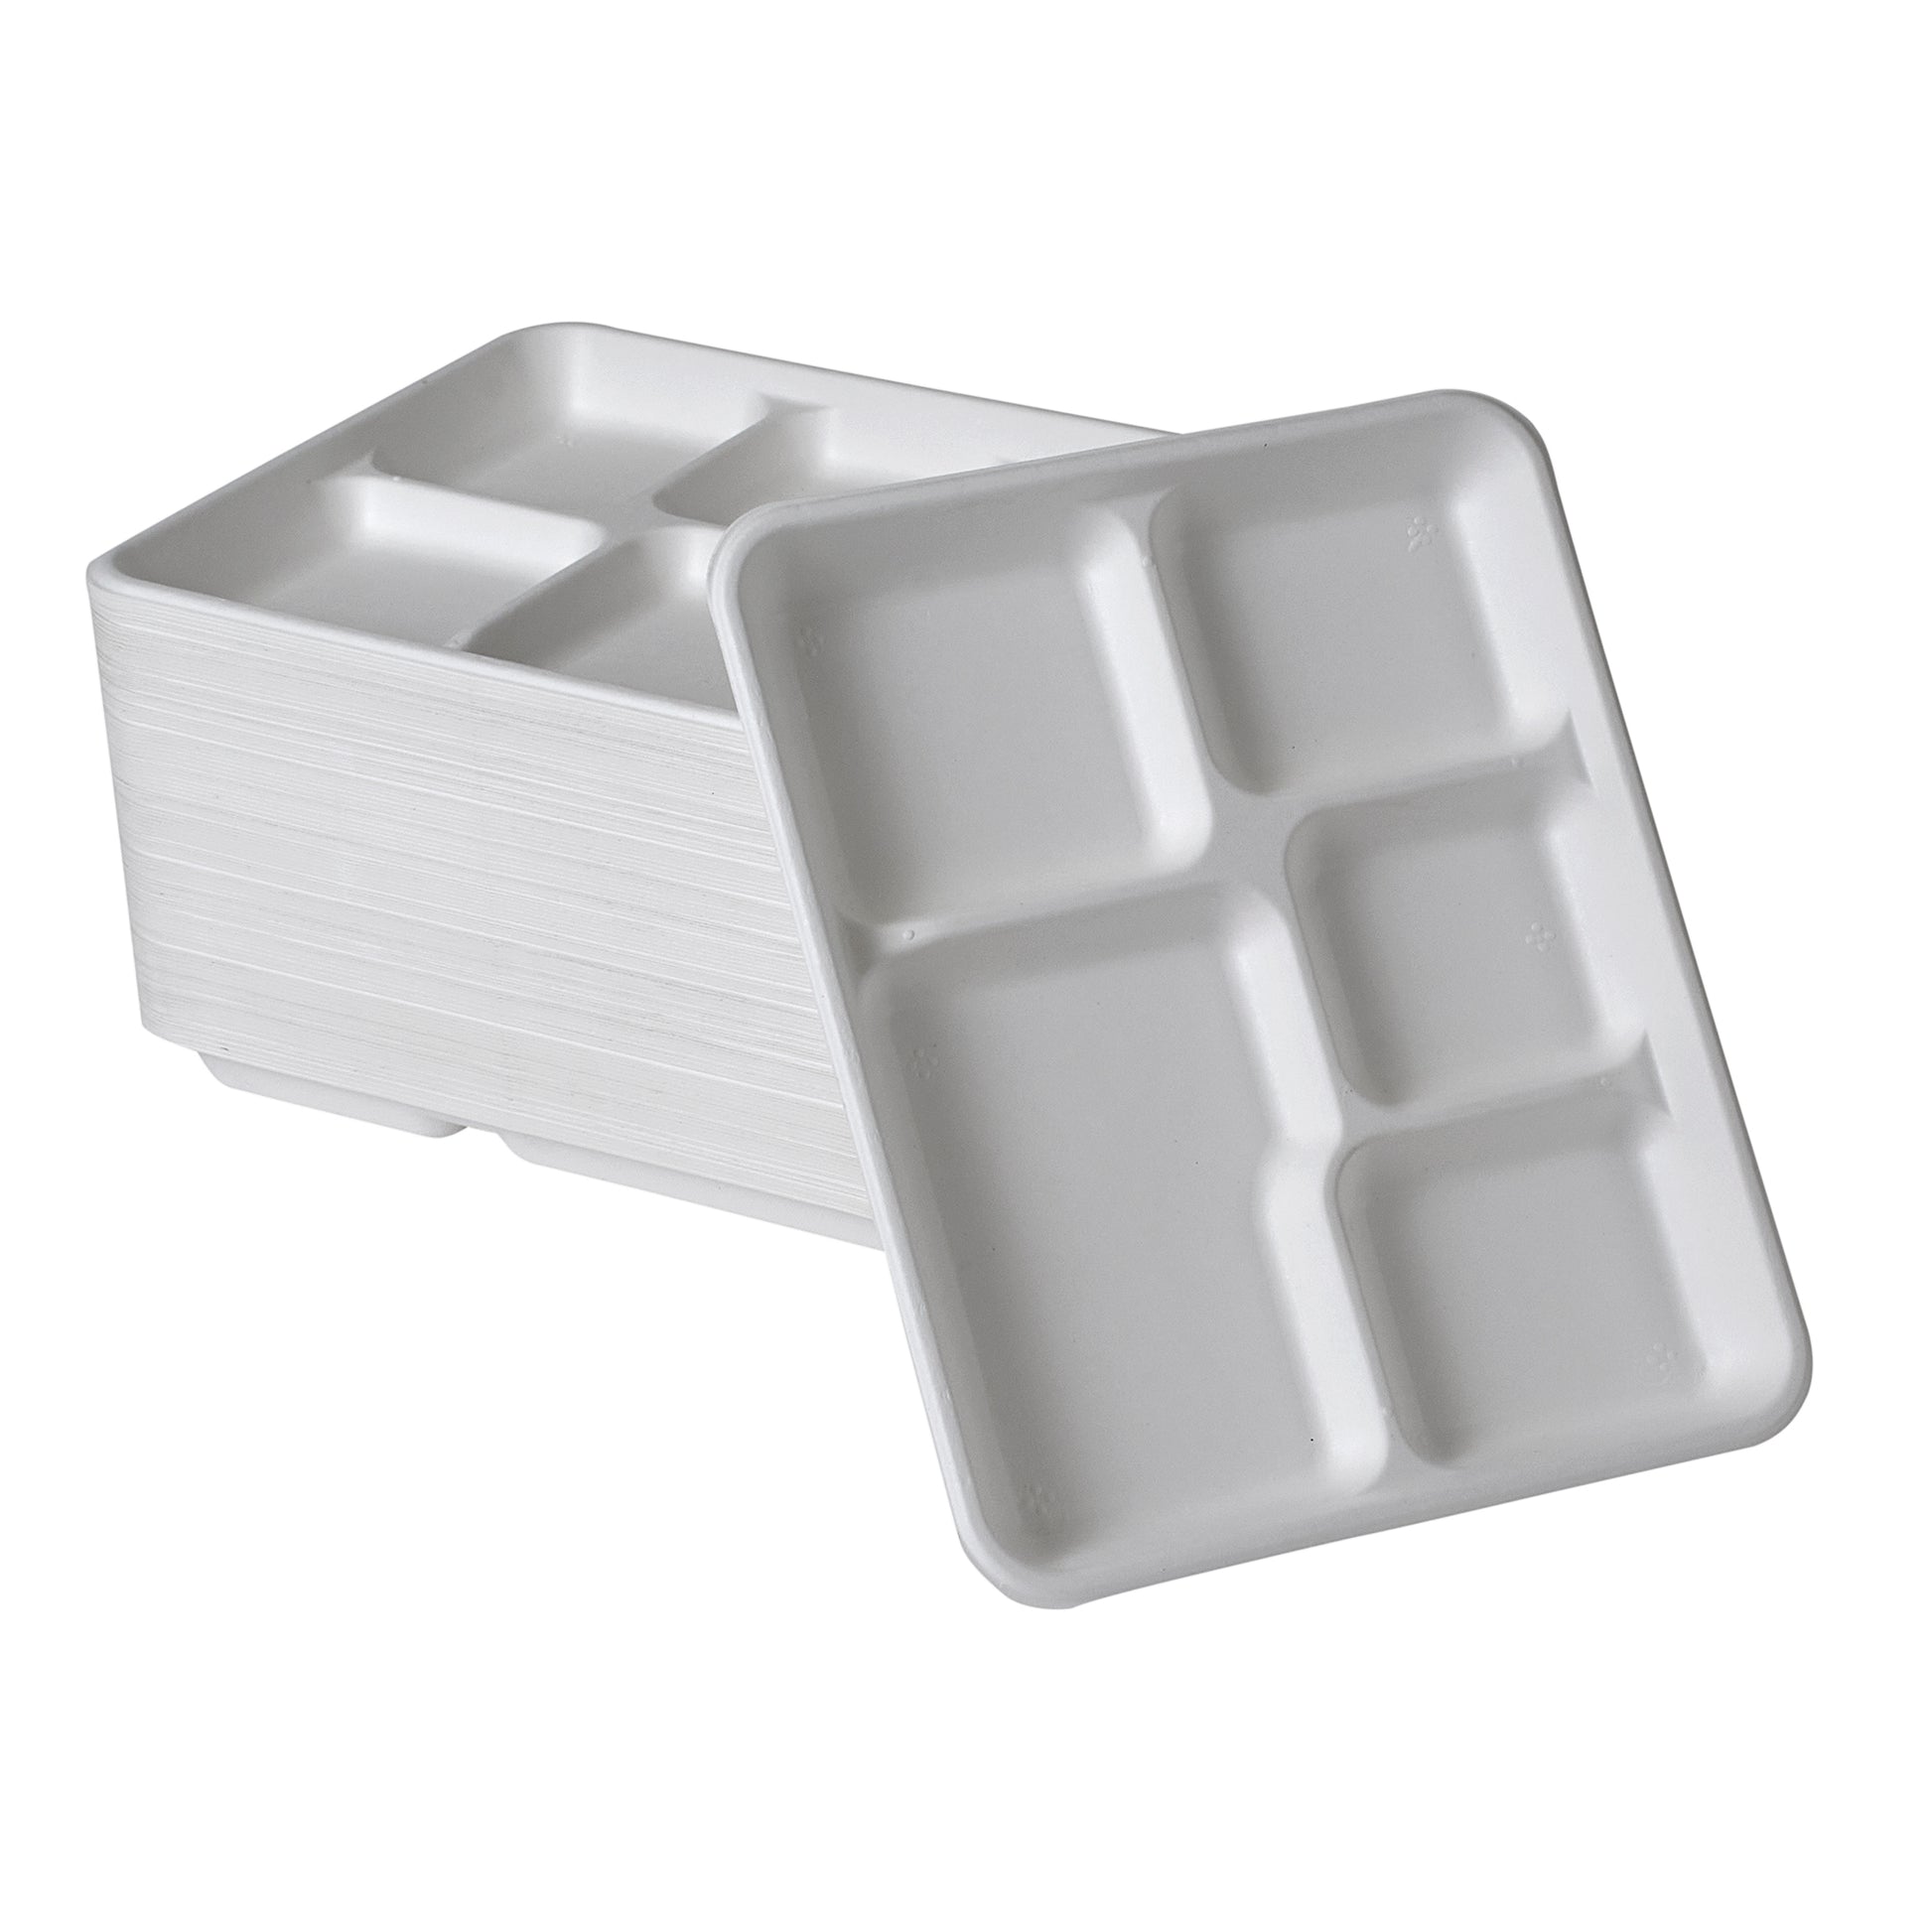 Select Settings Premium Single-Use Dinnerware [100-Pack] 5-Compartment Rectangle White Bagasse 10 inch Plates